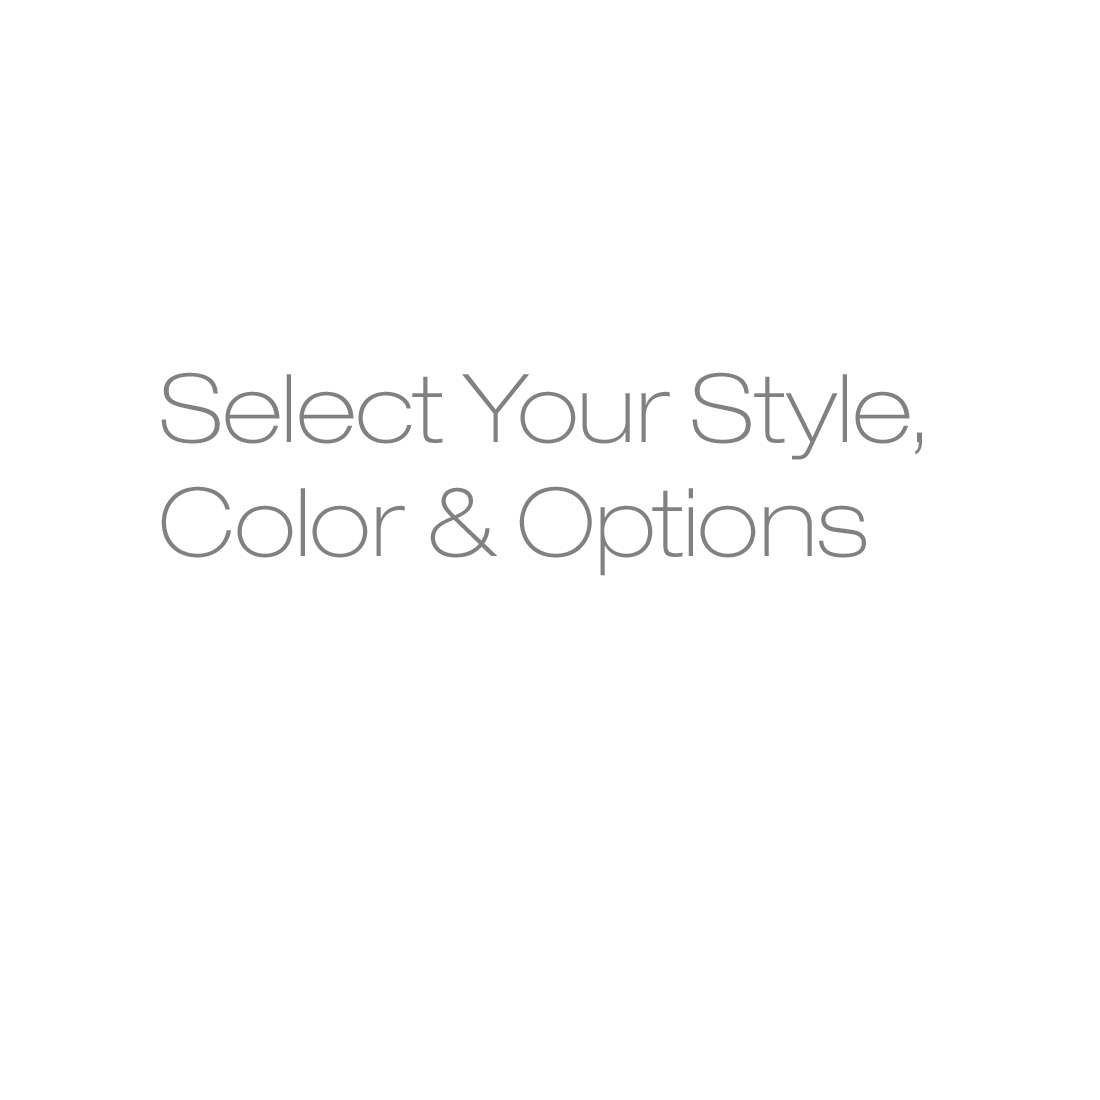 Select Your Style, Color & Options